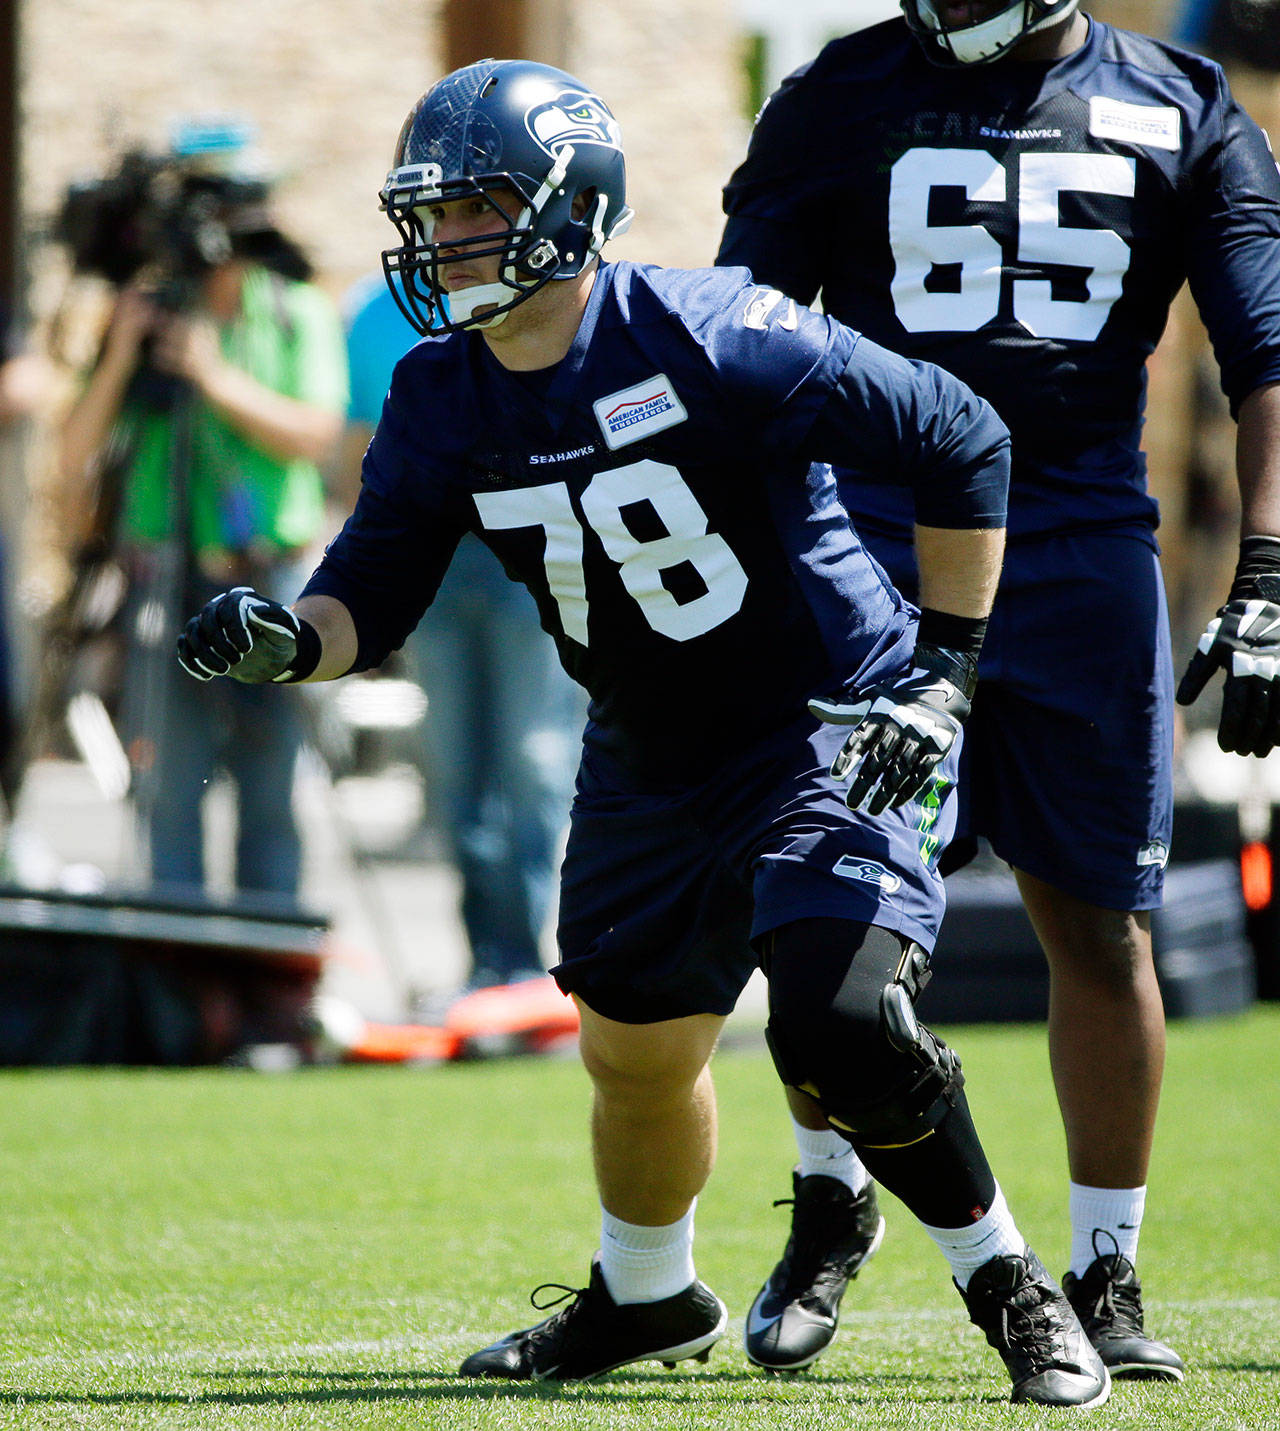 The Seahawks’ Luke Joeckel (78) moves during a drill at practice on June 2, 2017, in Renton. (AP Photo/Ted S. Warren)